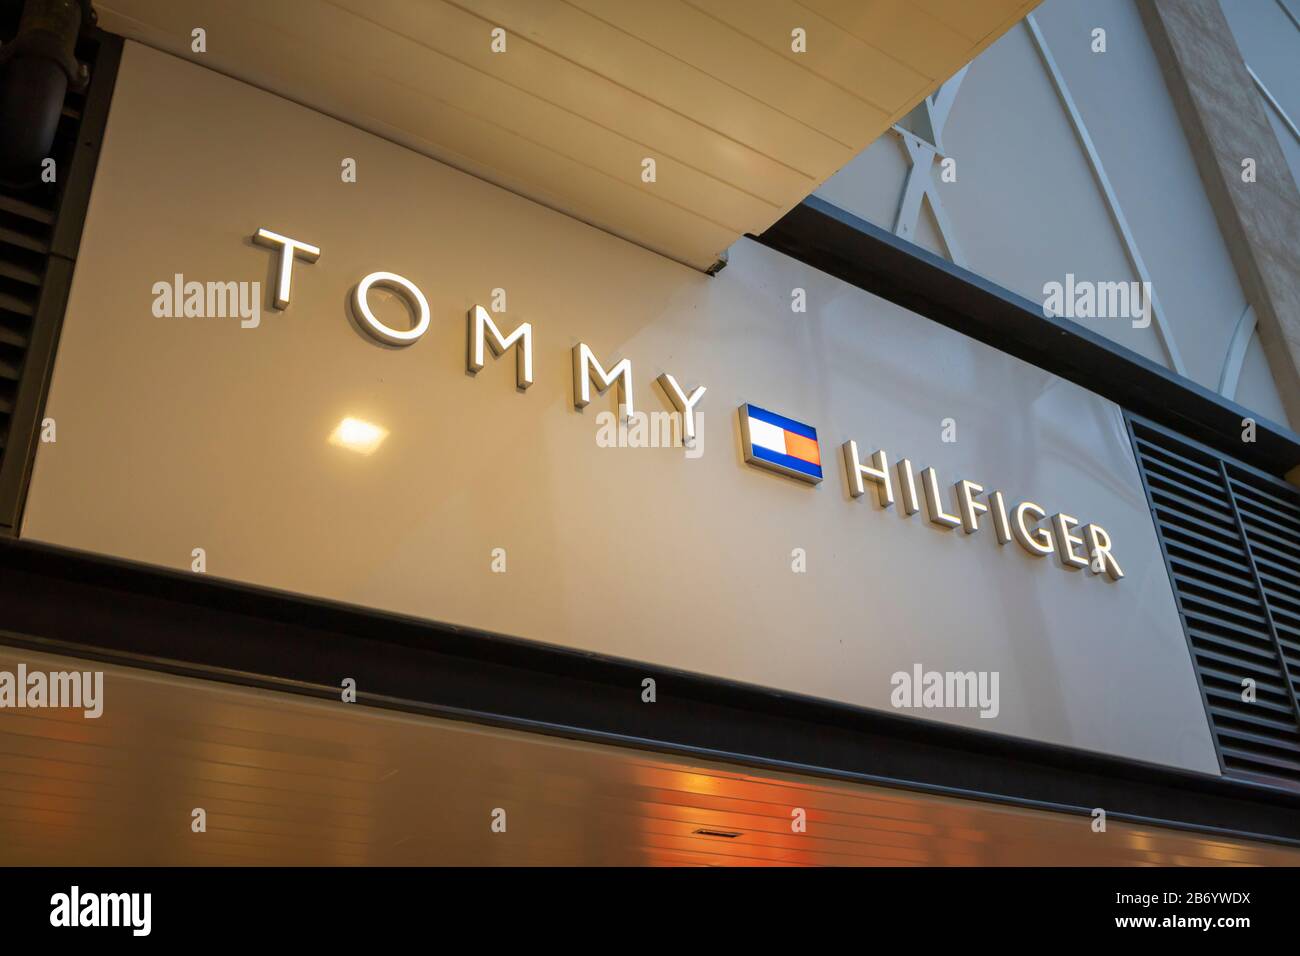 Name baord and logo of Tommy Hilfiger above the shop front in Gunwharf ...